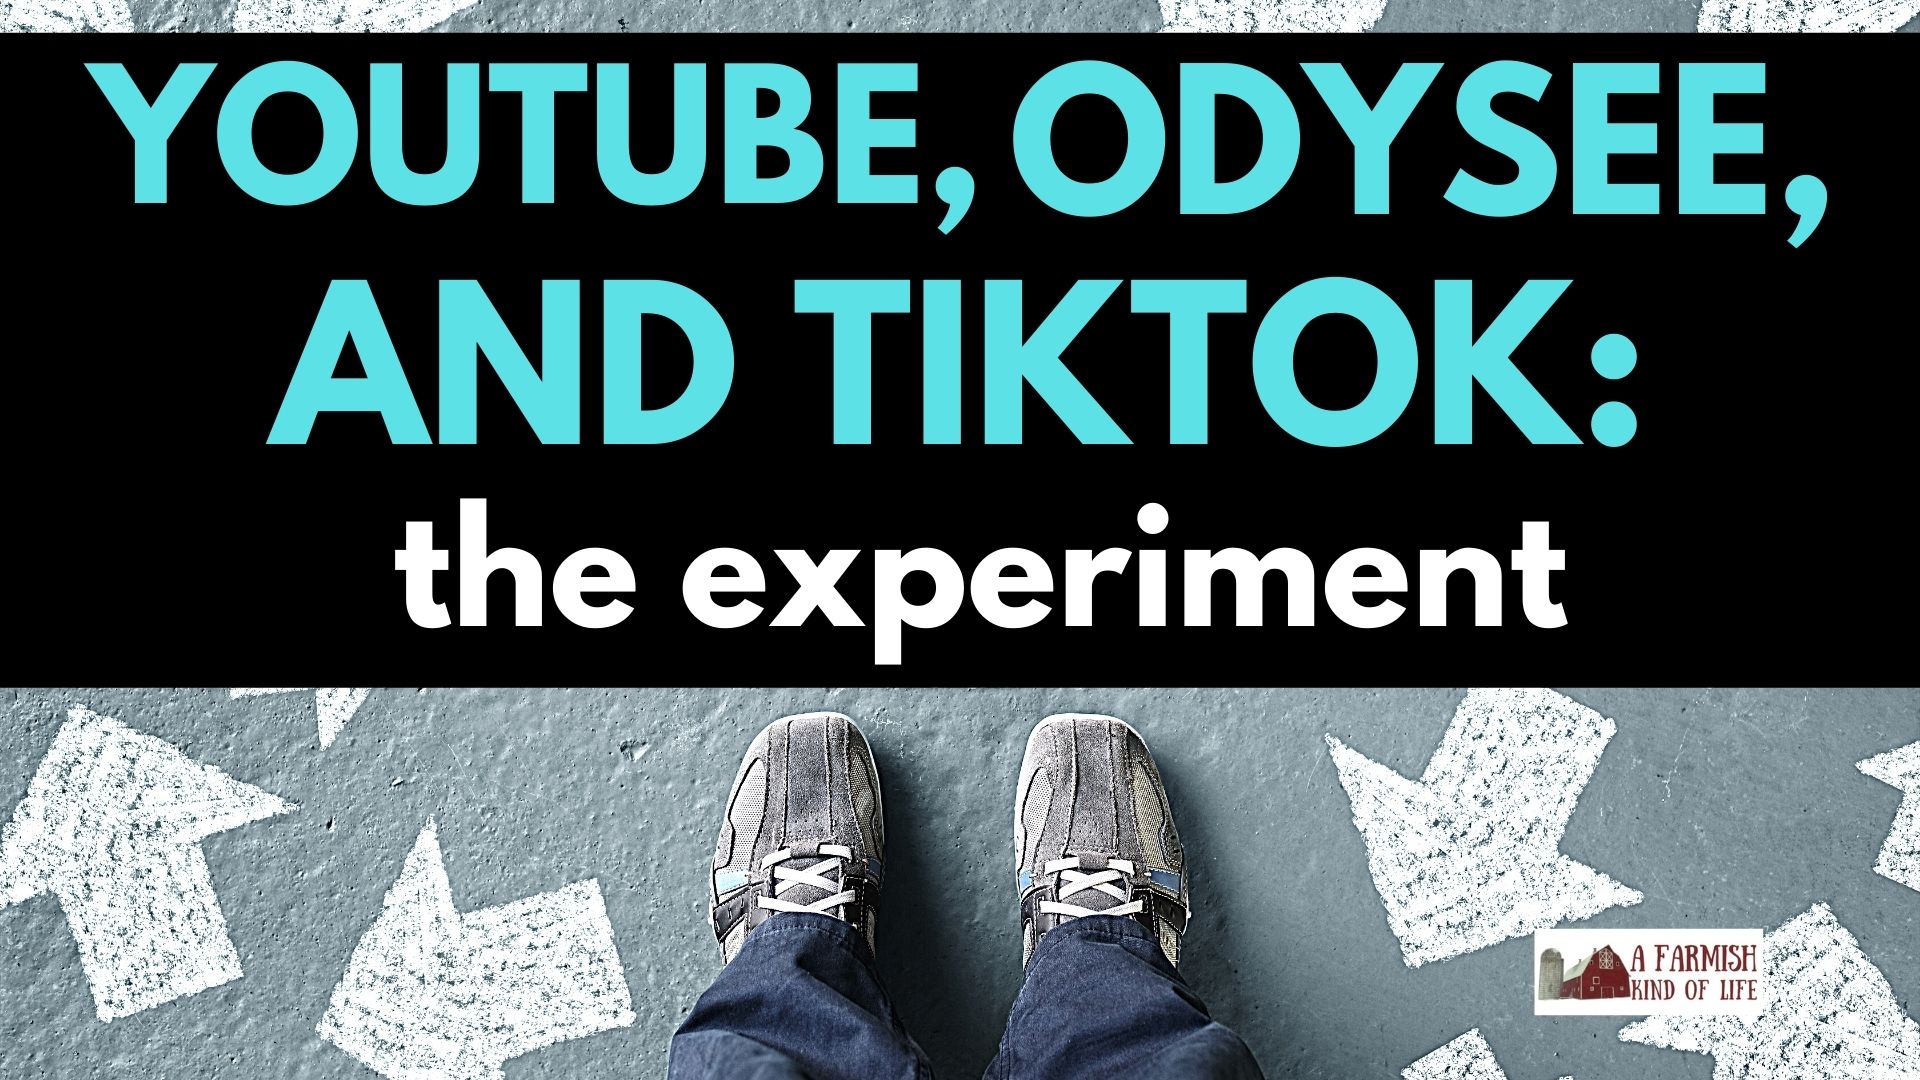 148: YouTube, Odysee, and Tiktok – The 4 week experiment